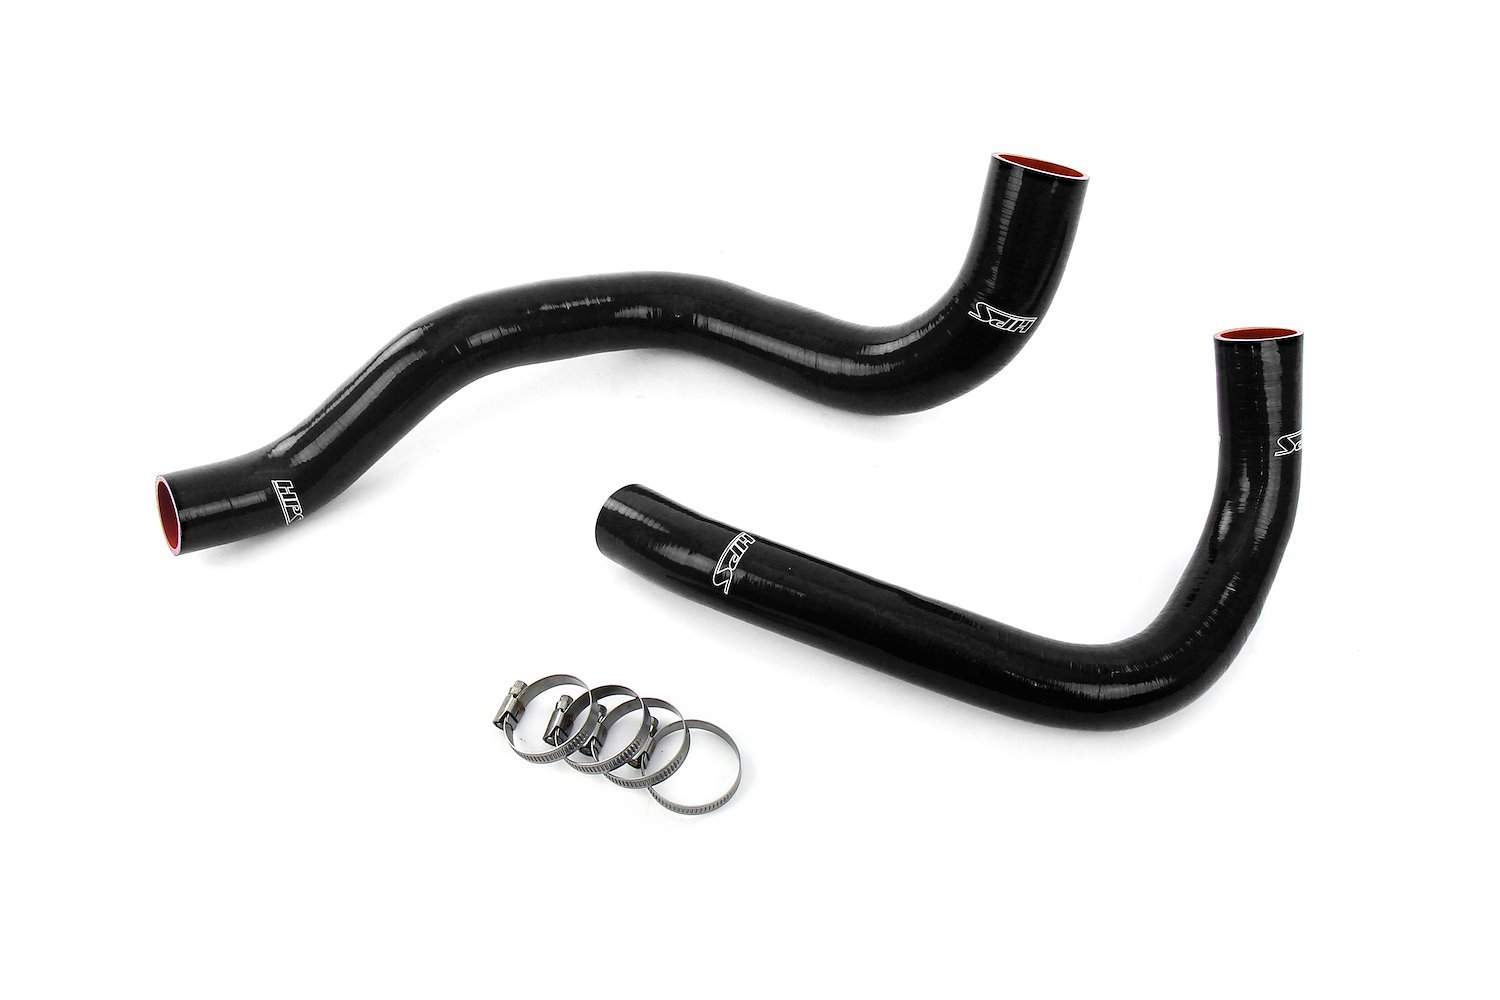 57-2129-BLK Radiator Hose Kit, 3-Ply Reinforced Silicone, Replaces Rubber Radiator Coolant Hoses